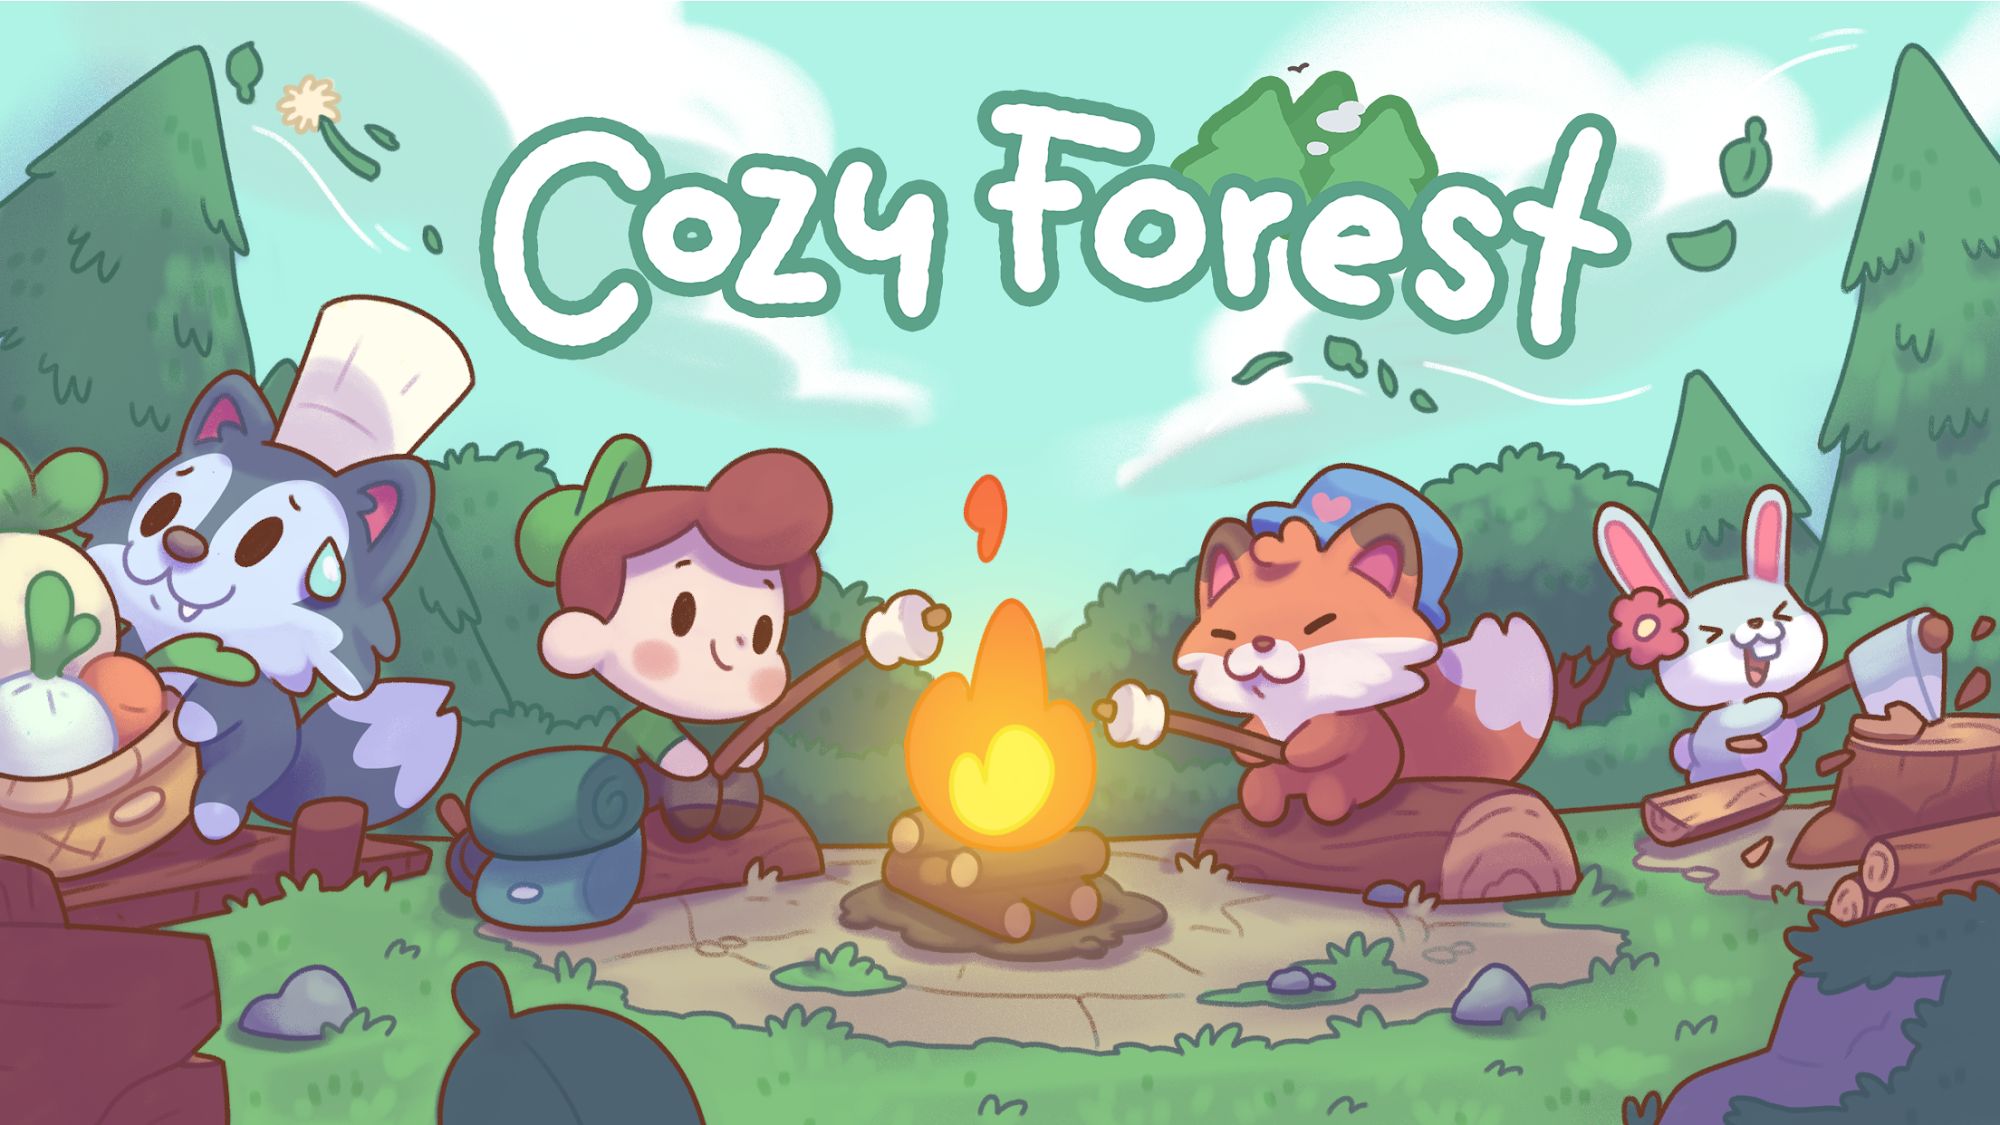 Scarica Cozy Forest gratis per Android A.n.d.r.o.i.d. .5...0. .a.n.d. .m.o.r.e.